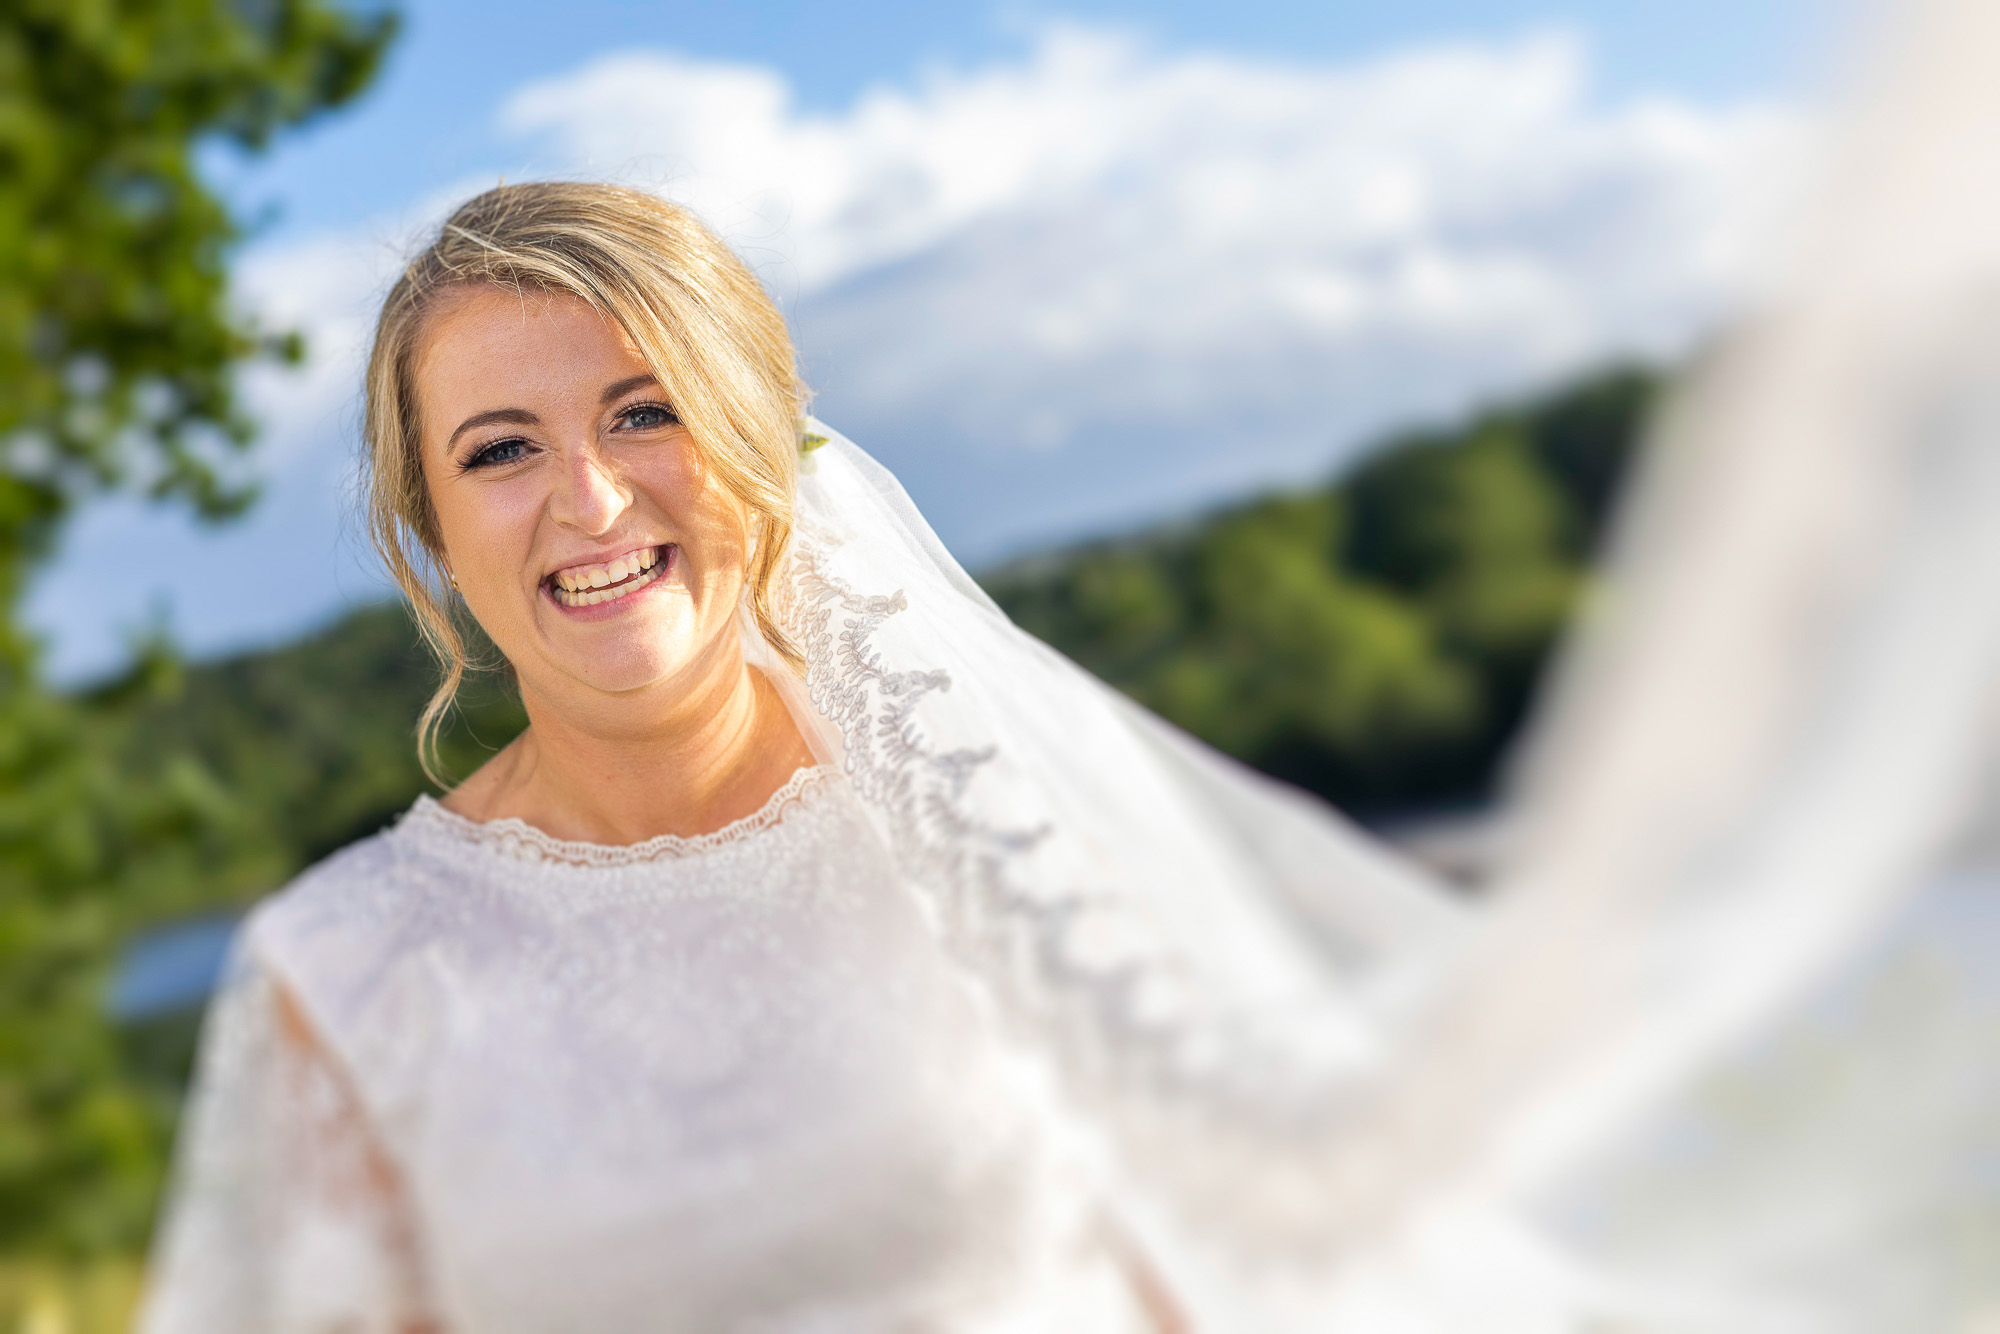 A colour image of a bride smiling directly into the camera. There is a blue sky, green trees, the image is taken at a slight tilt and the brides veil come over towards the lens whith the bride off the the left of the image. The surroundings are blurred with the brides face pin sharp and happy in expression. . Wedding photographer Aberdeen, Picture by Scott Cameron Baxter.